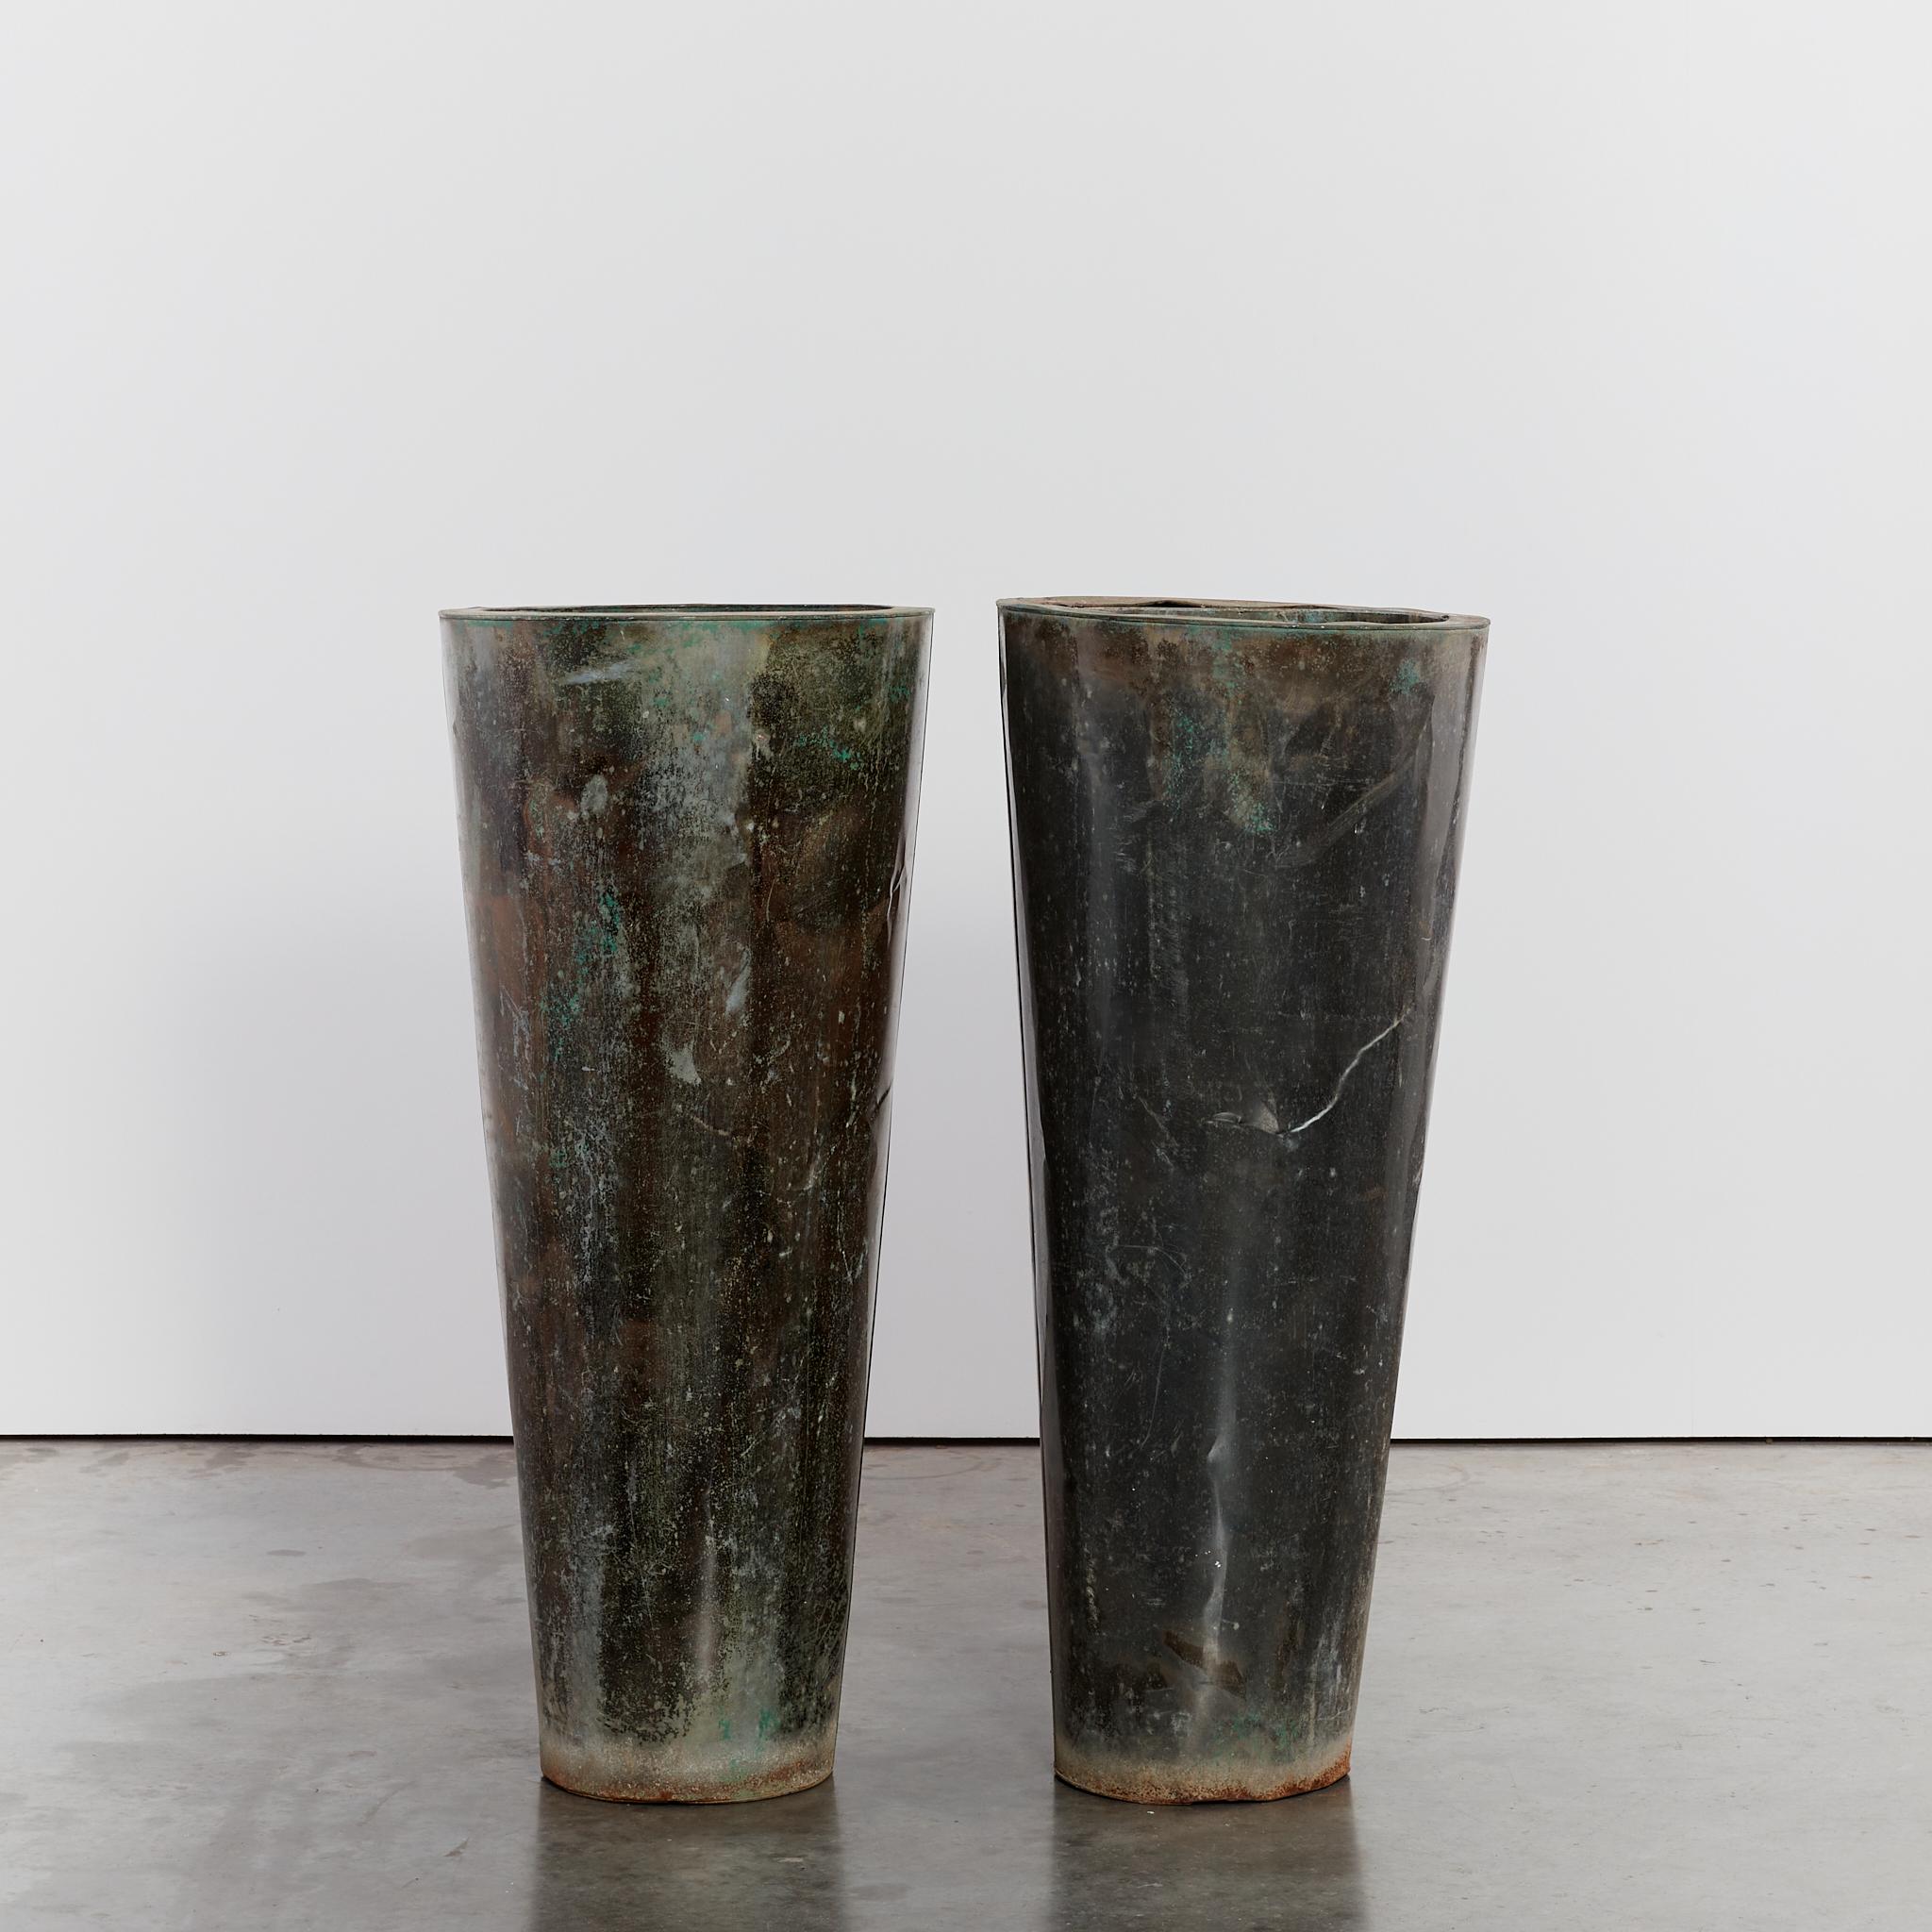 Pair of statement oversized metal planters with cylinder form and striking patina. Both come with drainage holes.

Period: Circa 1980's

Dimensions: H117 x D50cm each

Condition: Vintage condition - patina and signs of wear in keeping with age.